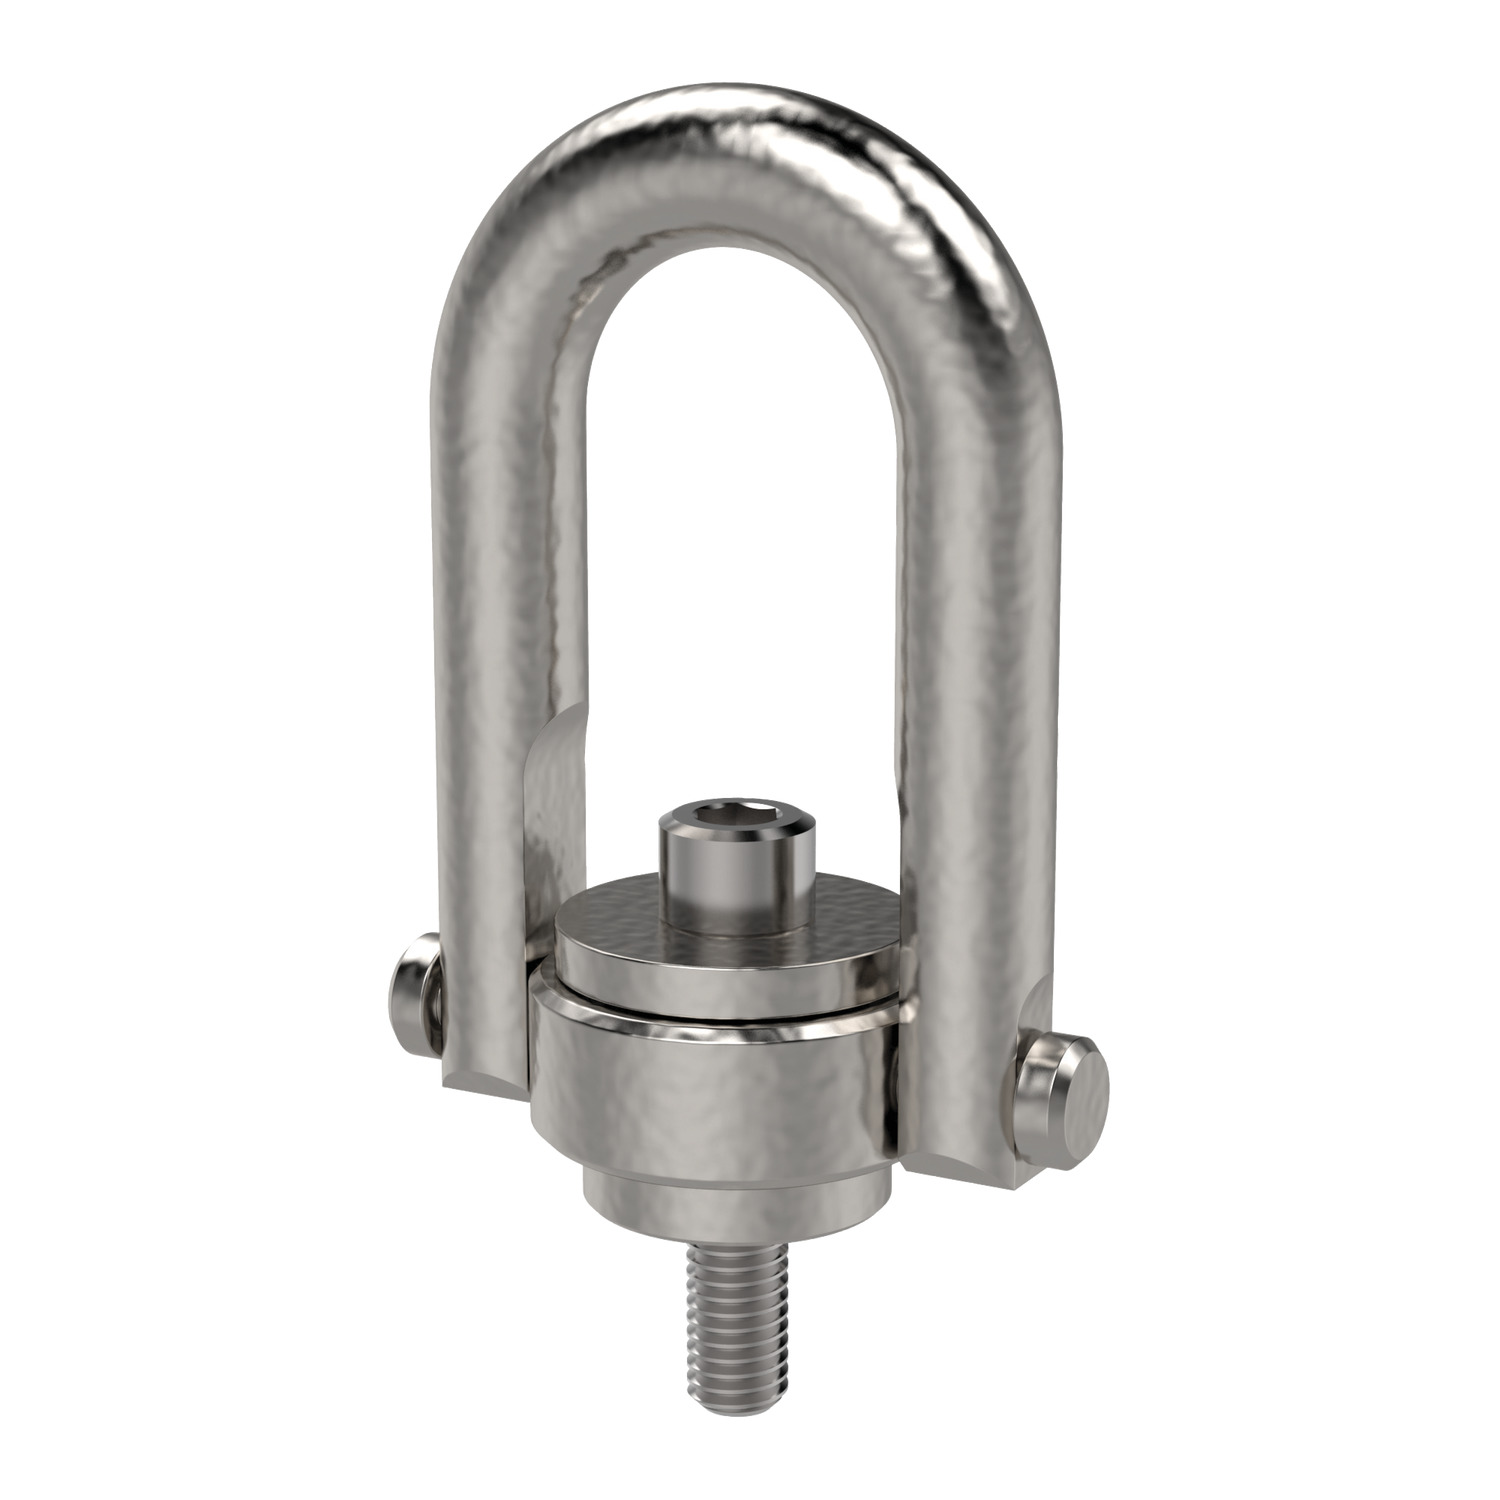 Lifting Points - Double Swivel - Male Standard bar stainless steel lifting points. Tested for liquid penetration and purification process.